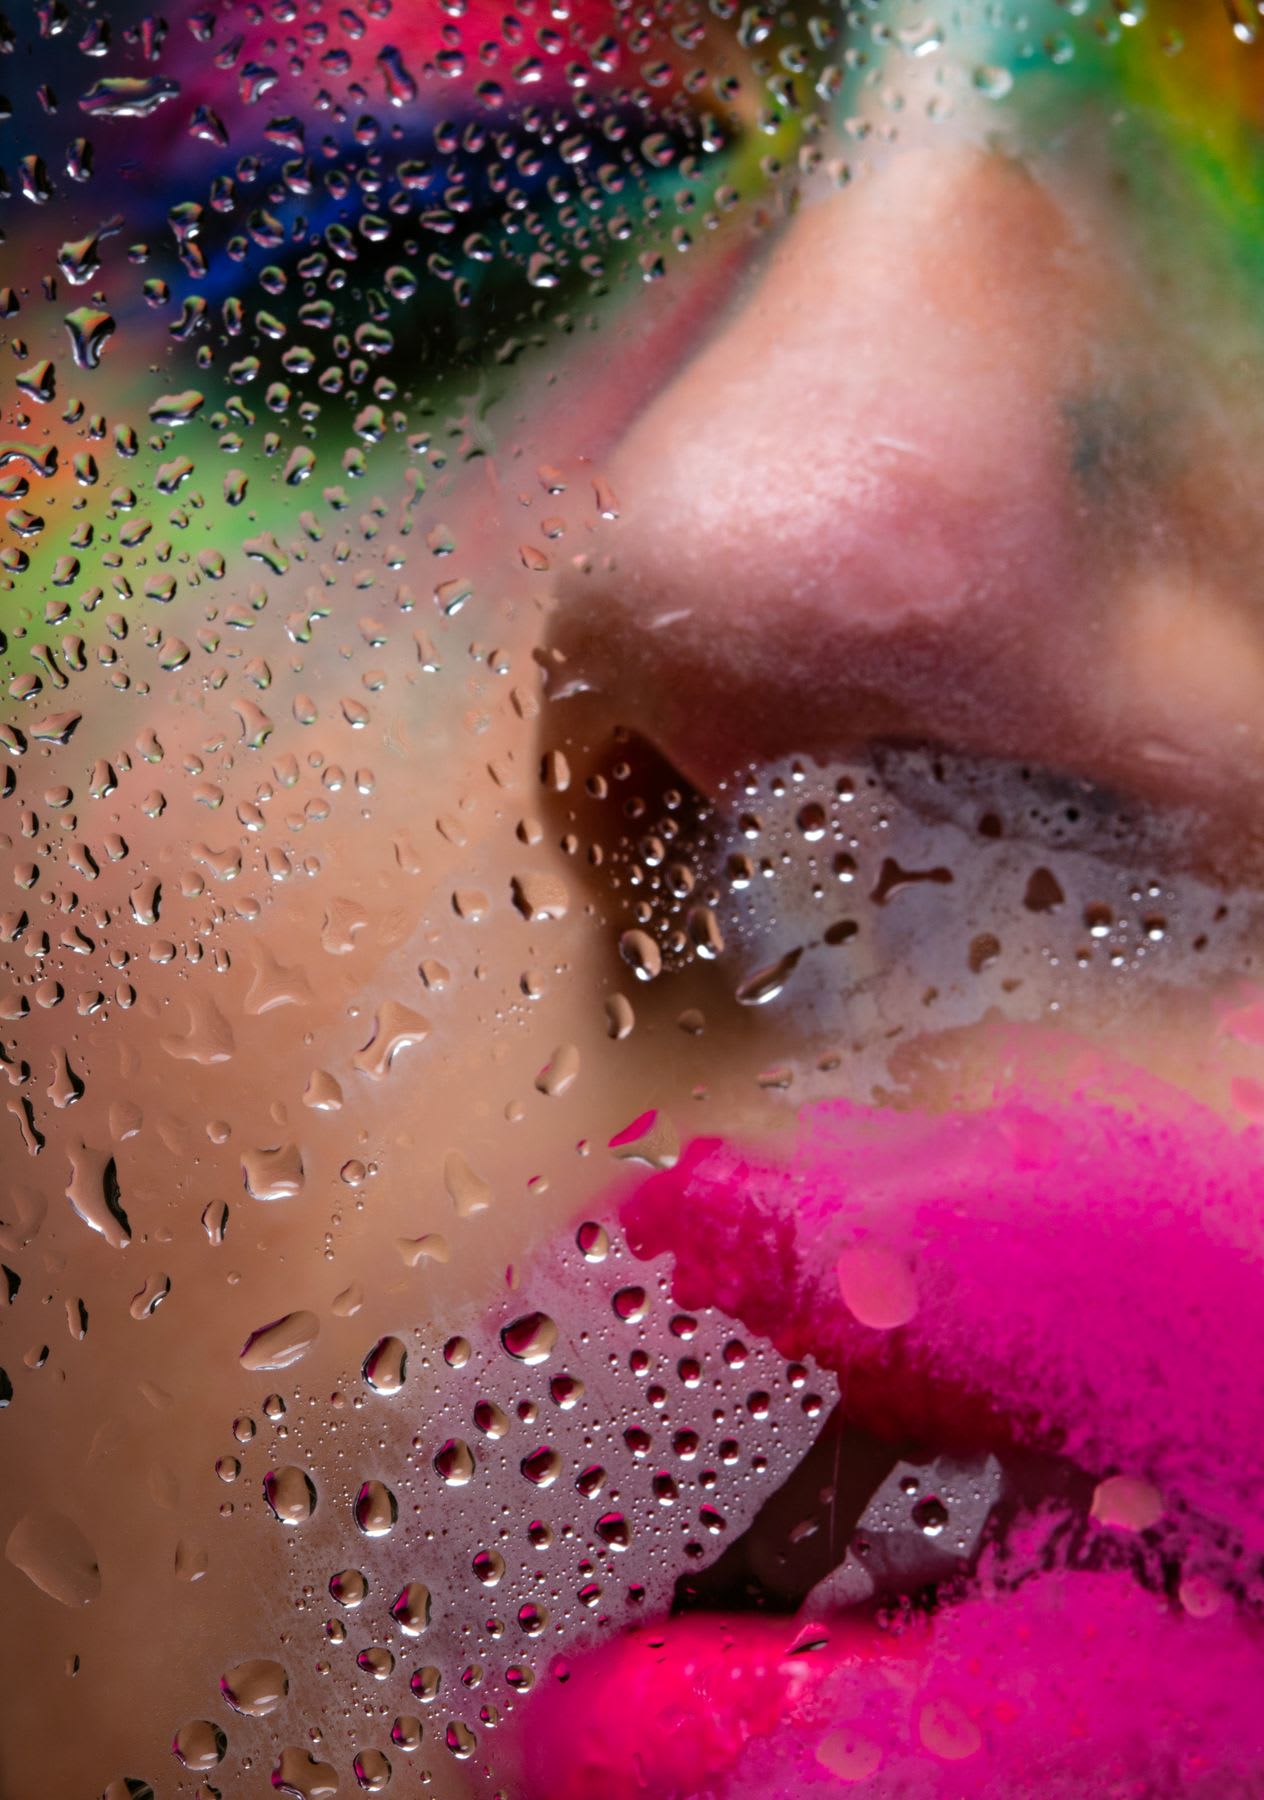 Portrait of a woman wearing bright and colorful makeup while outside with her face touching wet glass in the daytime.